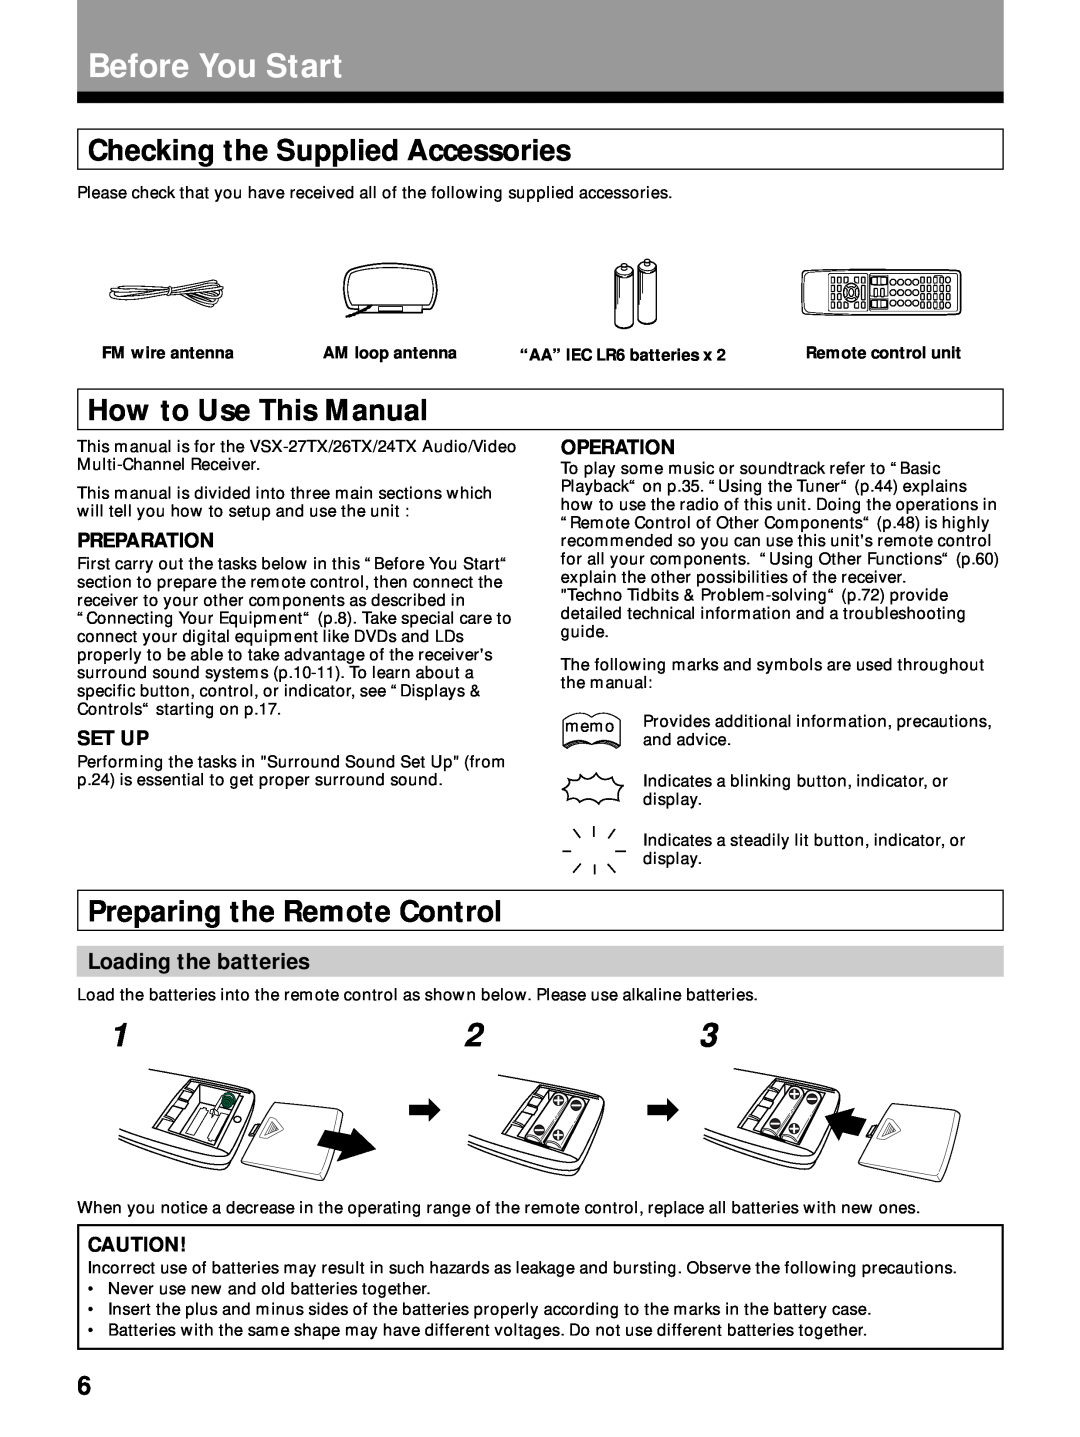 Pioneer VSX-27TX Before You Start, Checking the Supplied Accessories, How to Use This Manual, Preparing the Remote Control 